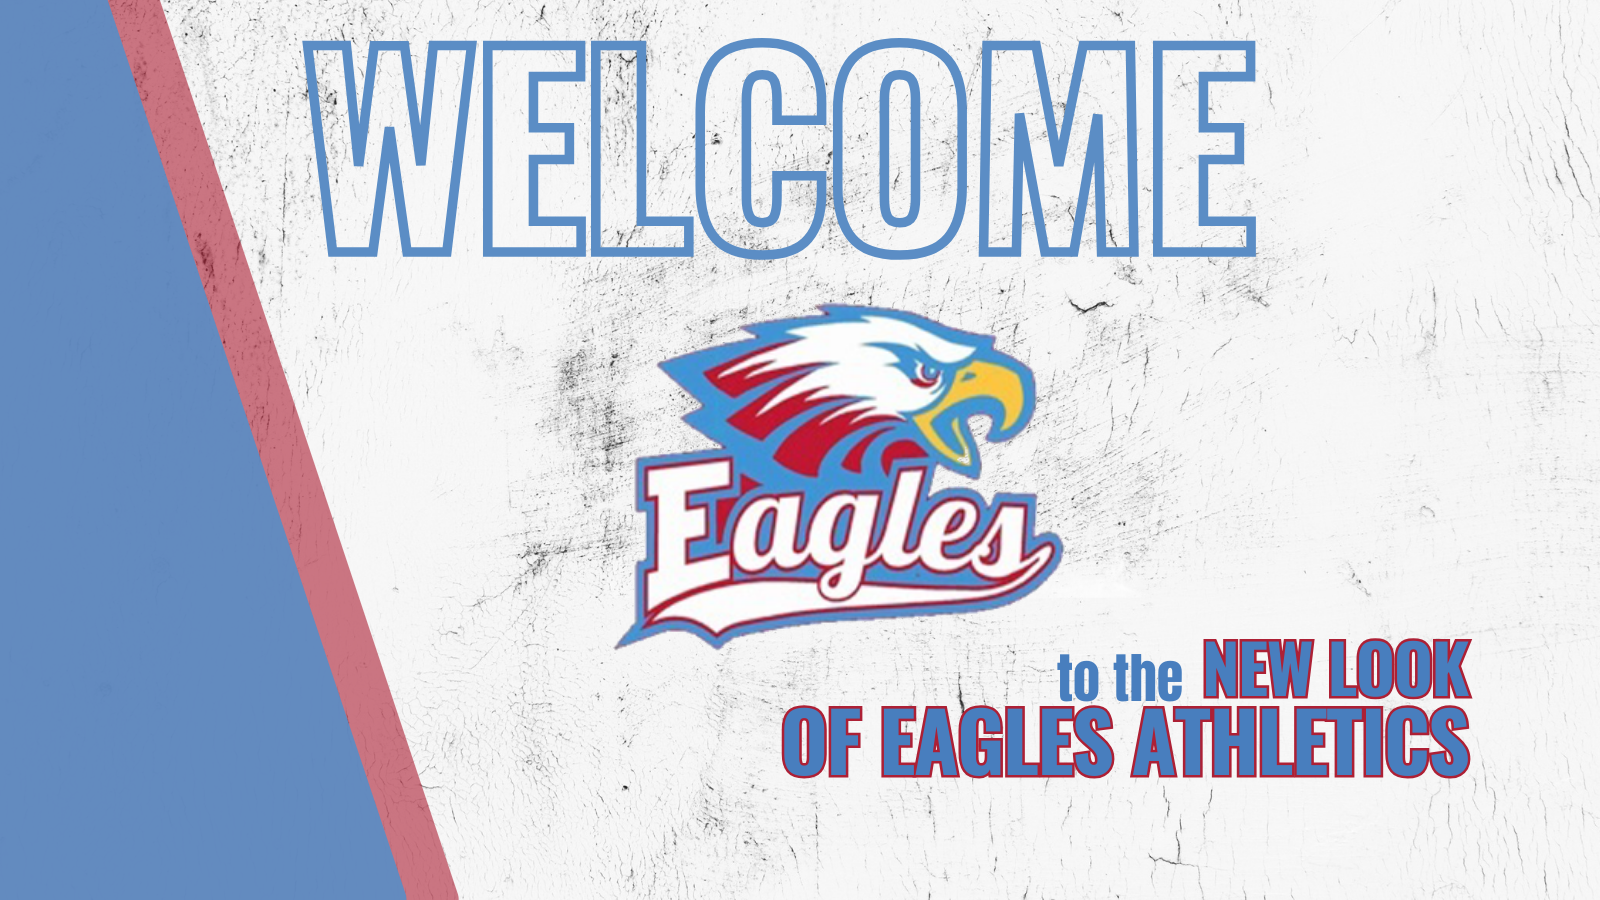 1709847896_CopyofOleyValleyWelcometo1280x320pxTwitterPost5.png - Image for 🎉 Exciting News for Eagles Athletics Fans! 🎉